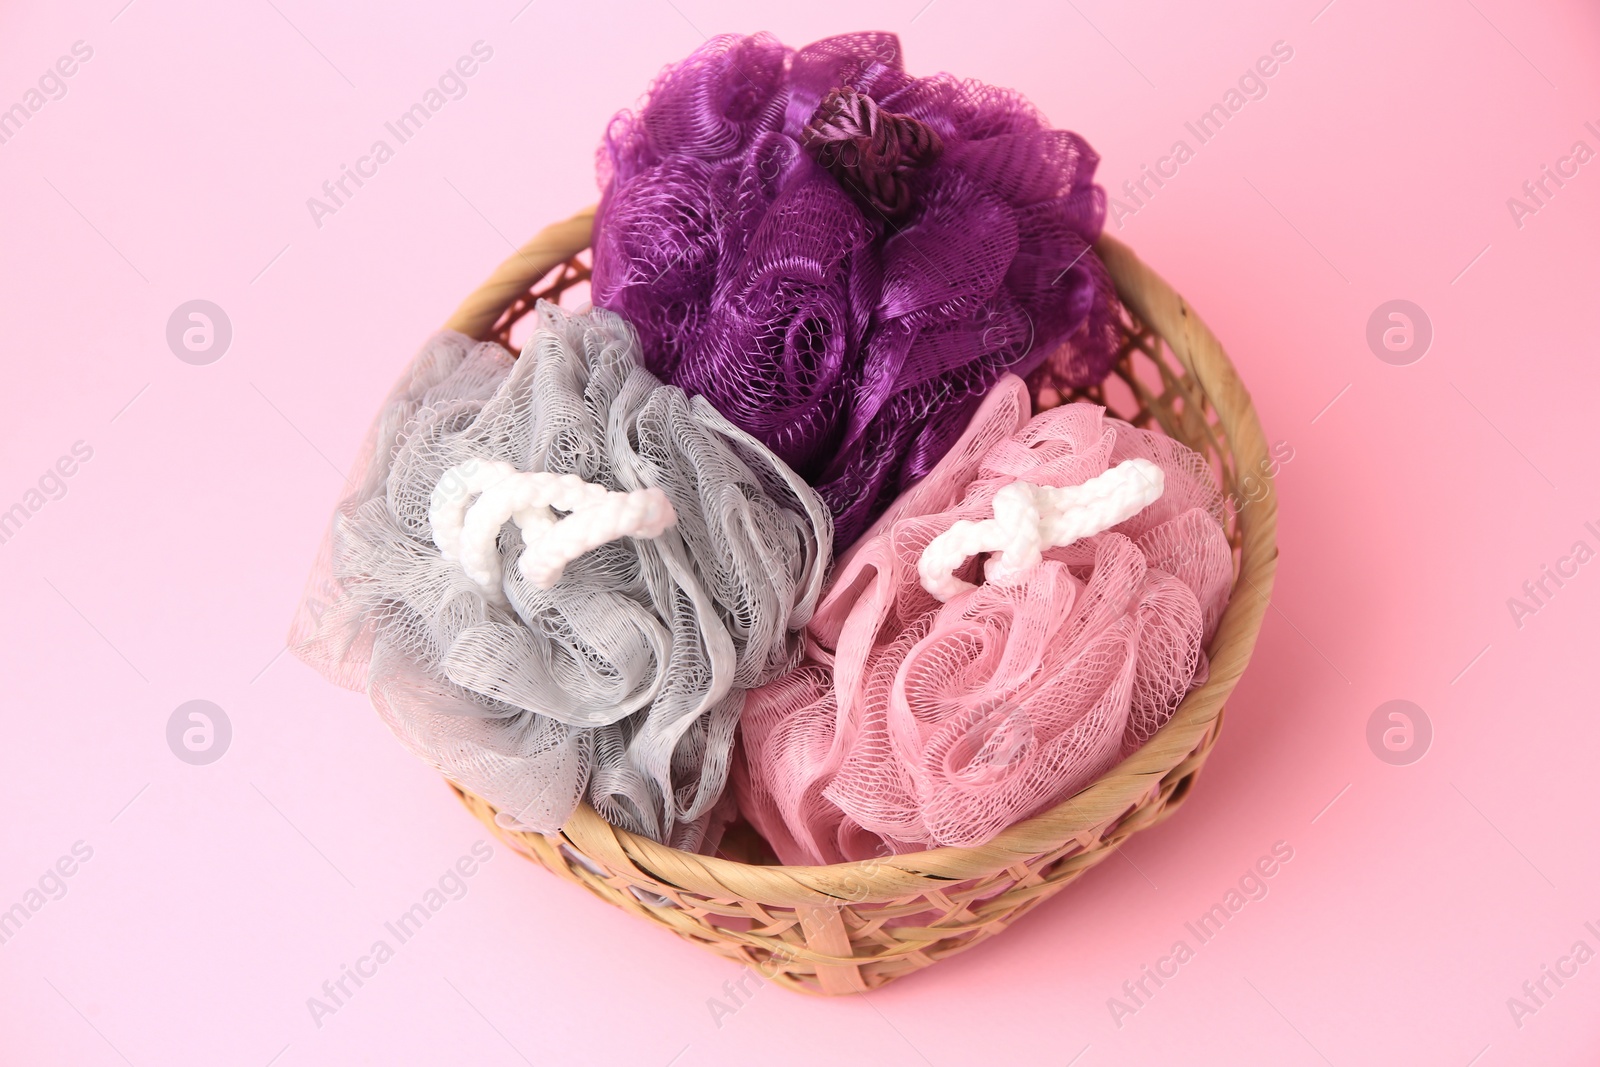 Photo of Wicker basket with colorful shower puffs on pink background, above view